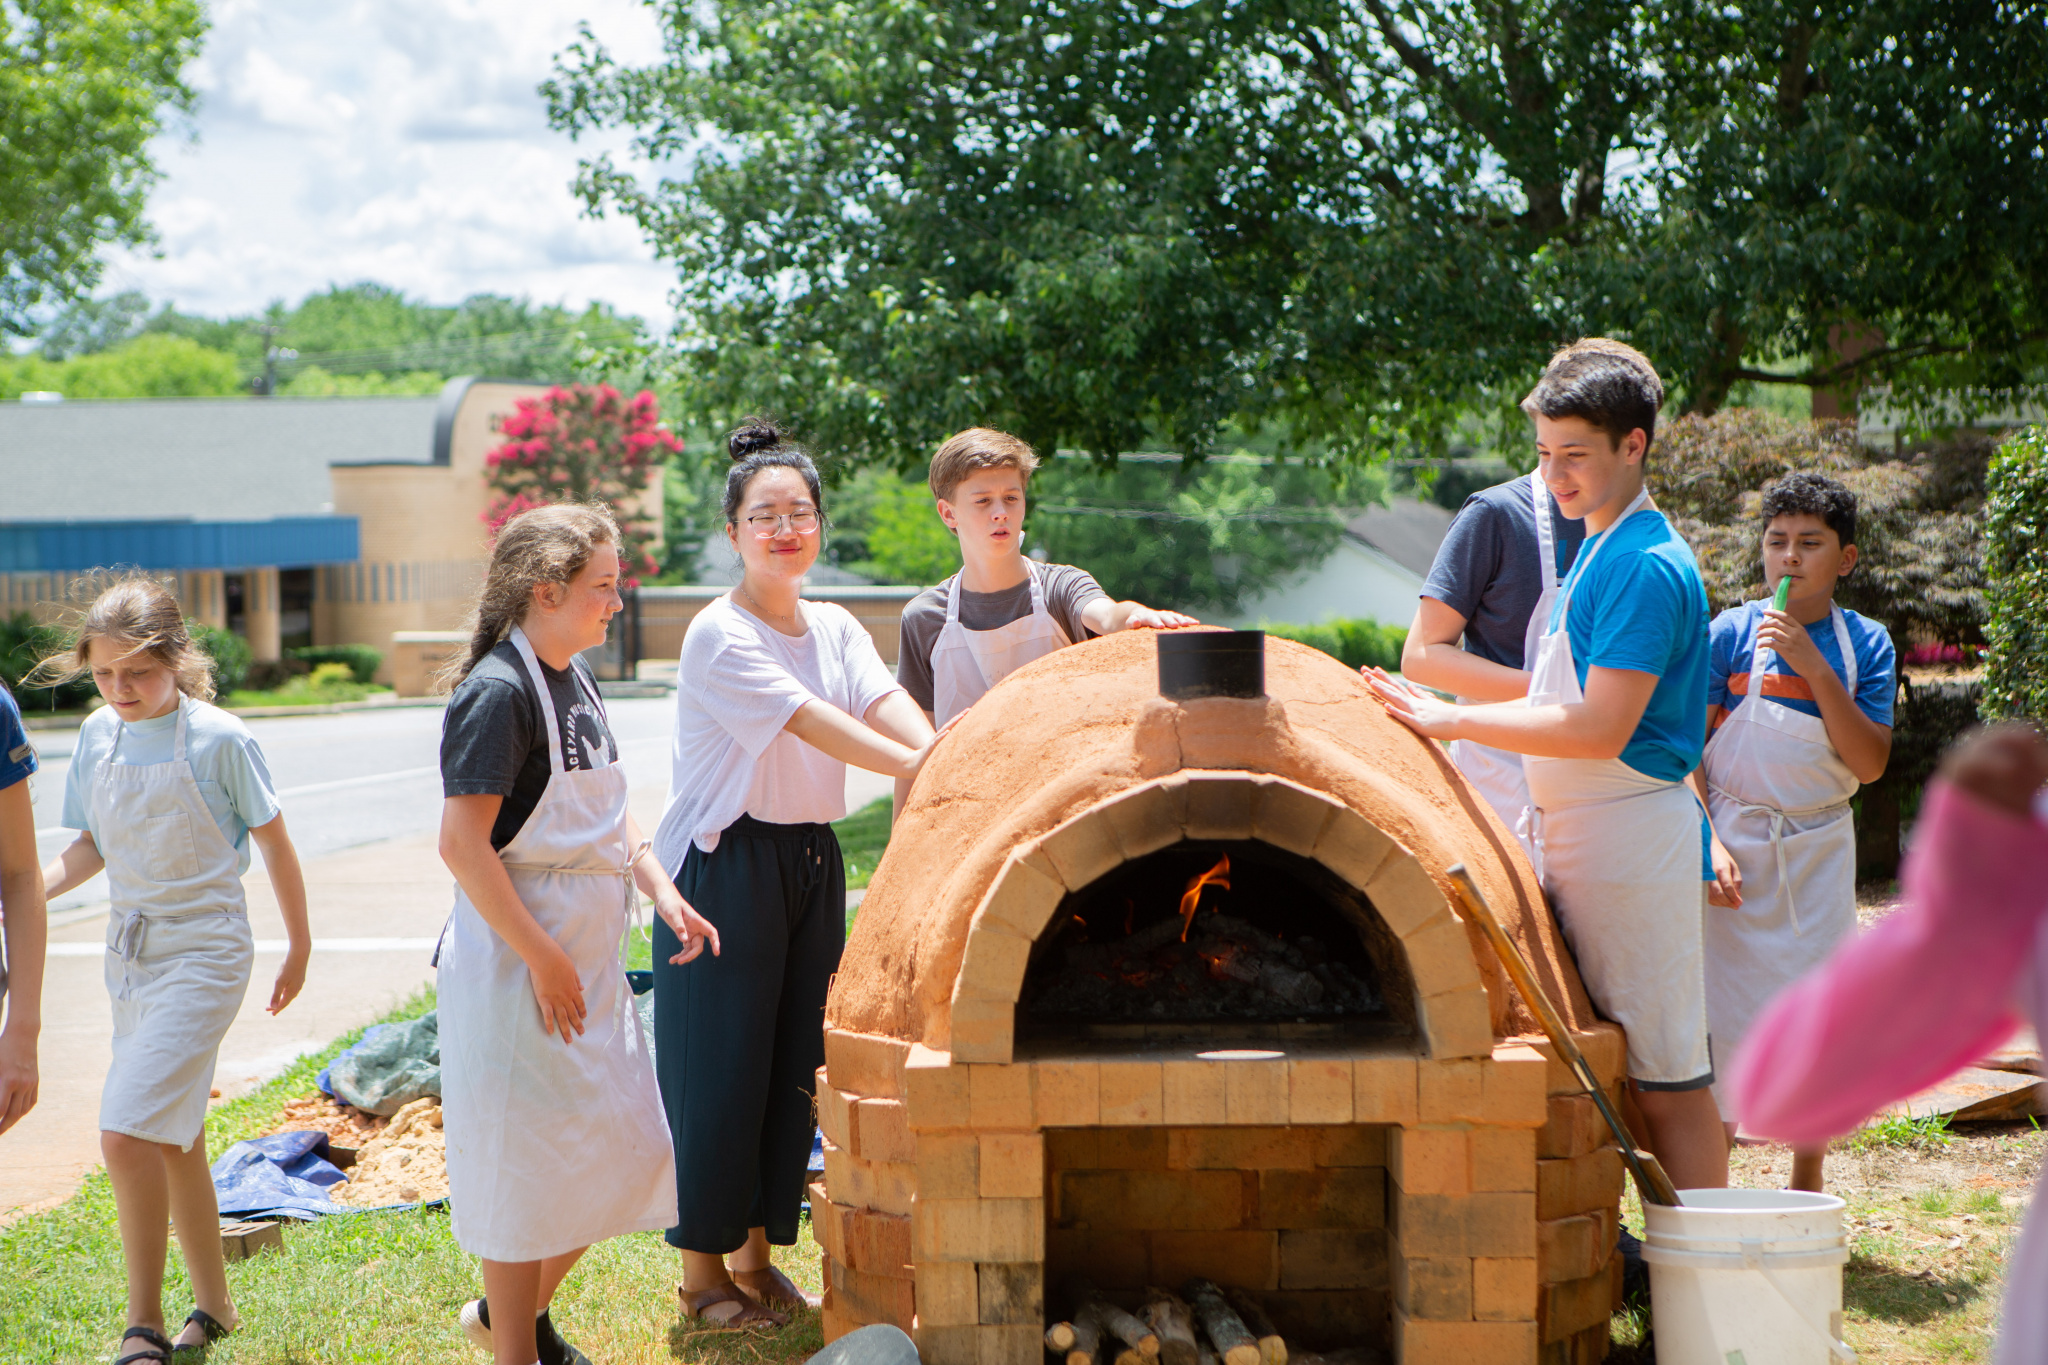 Middle school EDUcampers bake their doughs in the brick oven they helped construct